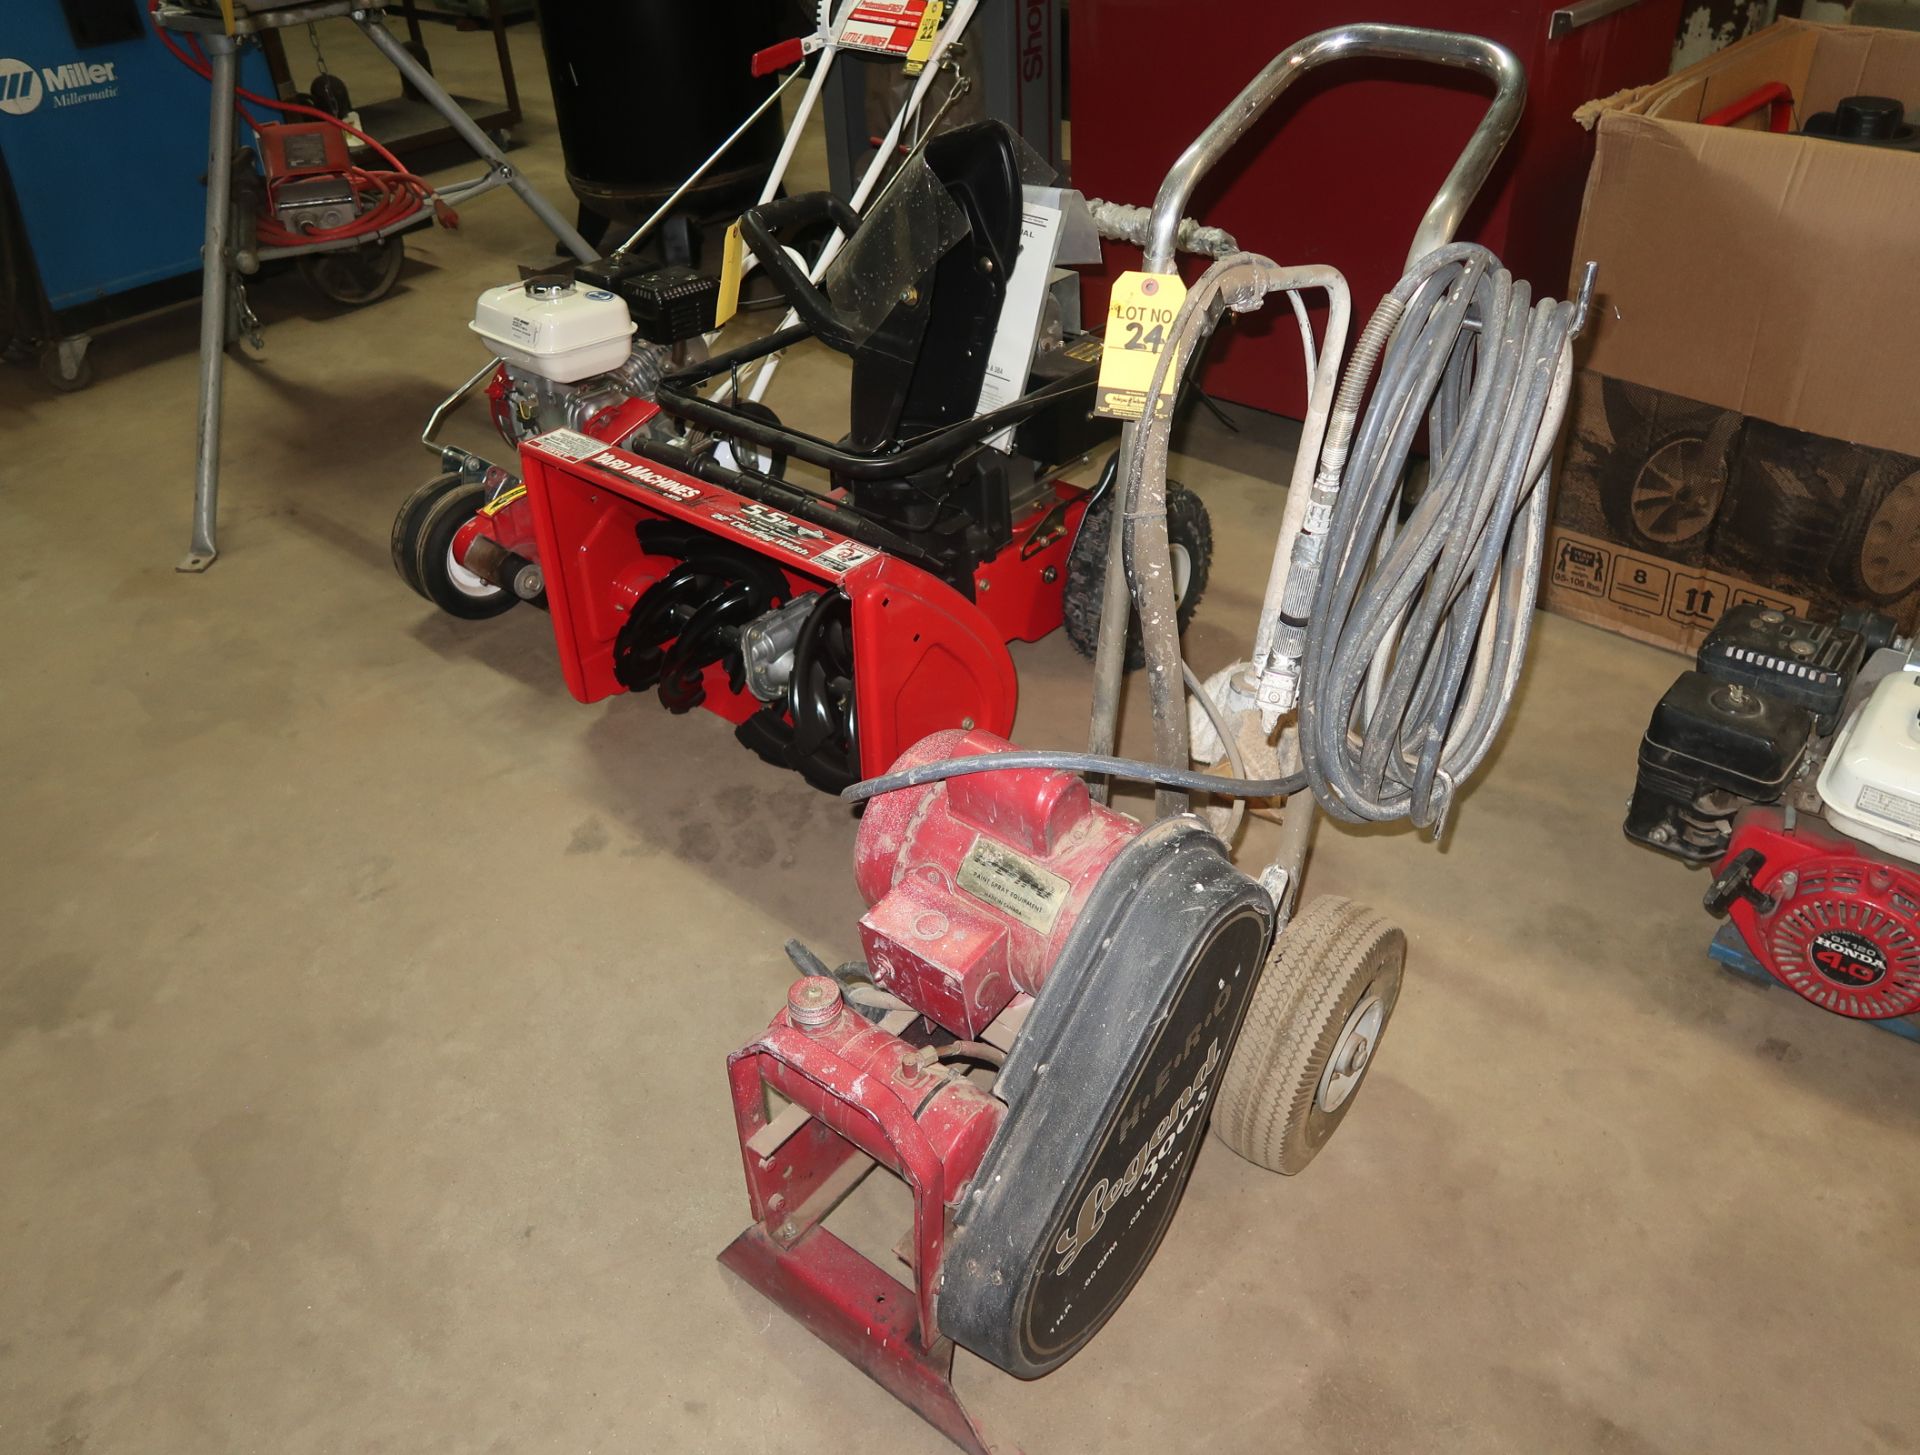 HERO PORTABLE, GAS OPERATED PAINT SPRAYER - Image 2 of 2